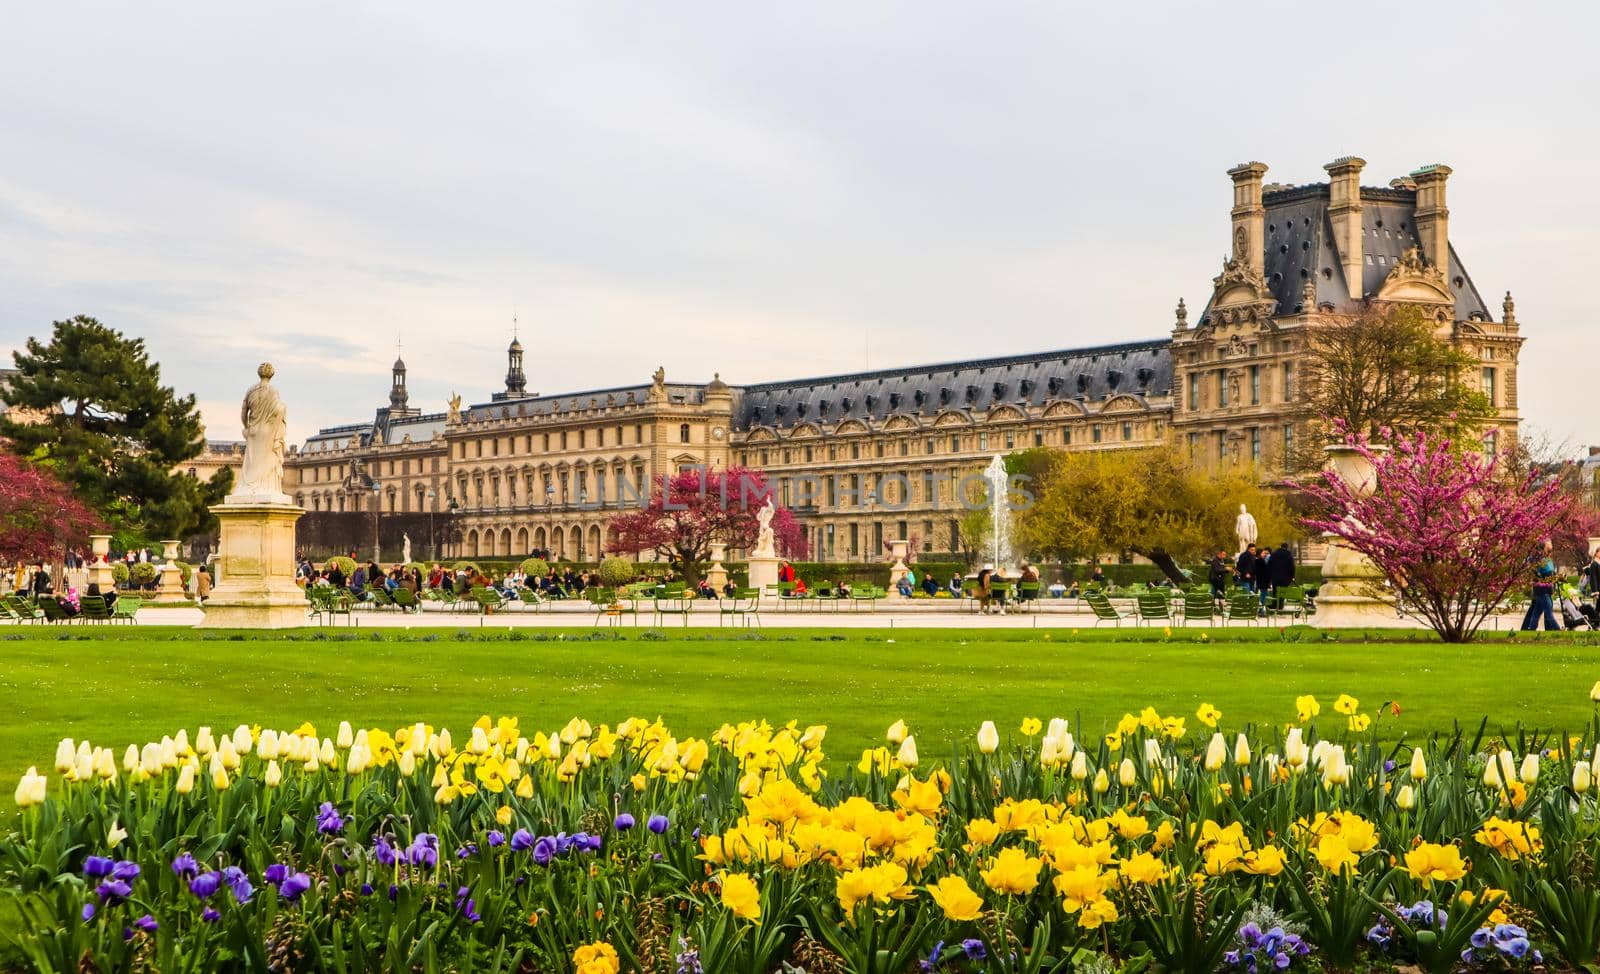 Marvelous spring Tuileries garden and view at the Louvre Palace in Paris France. April 2019 by Olayola